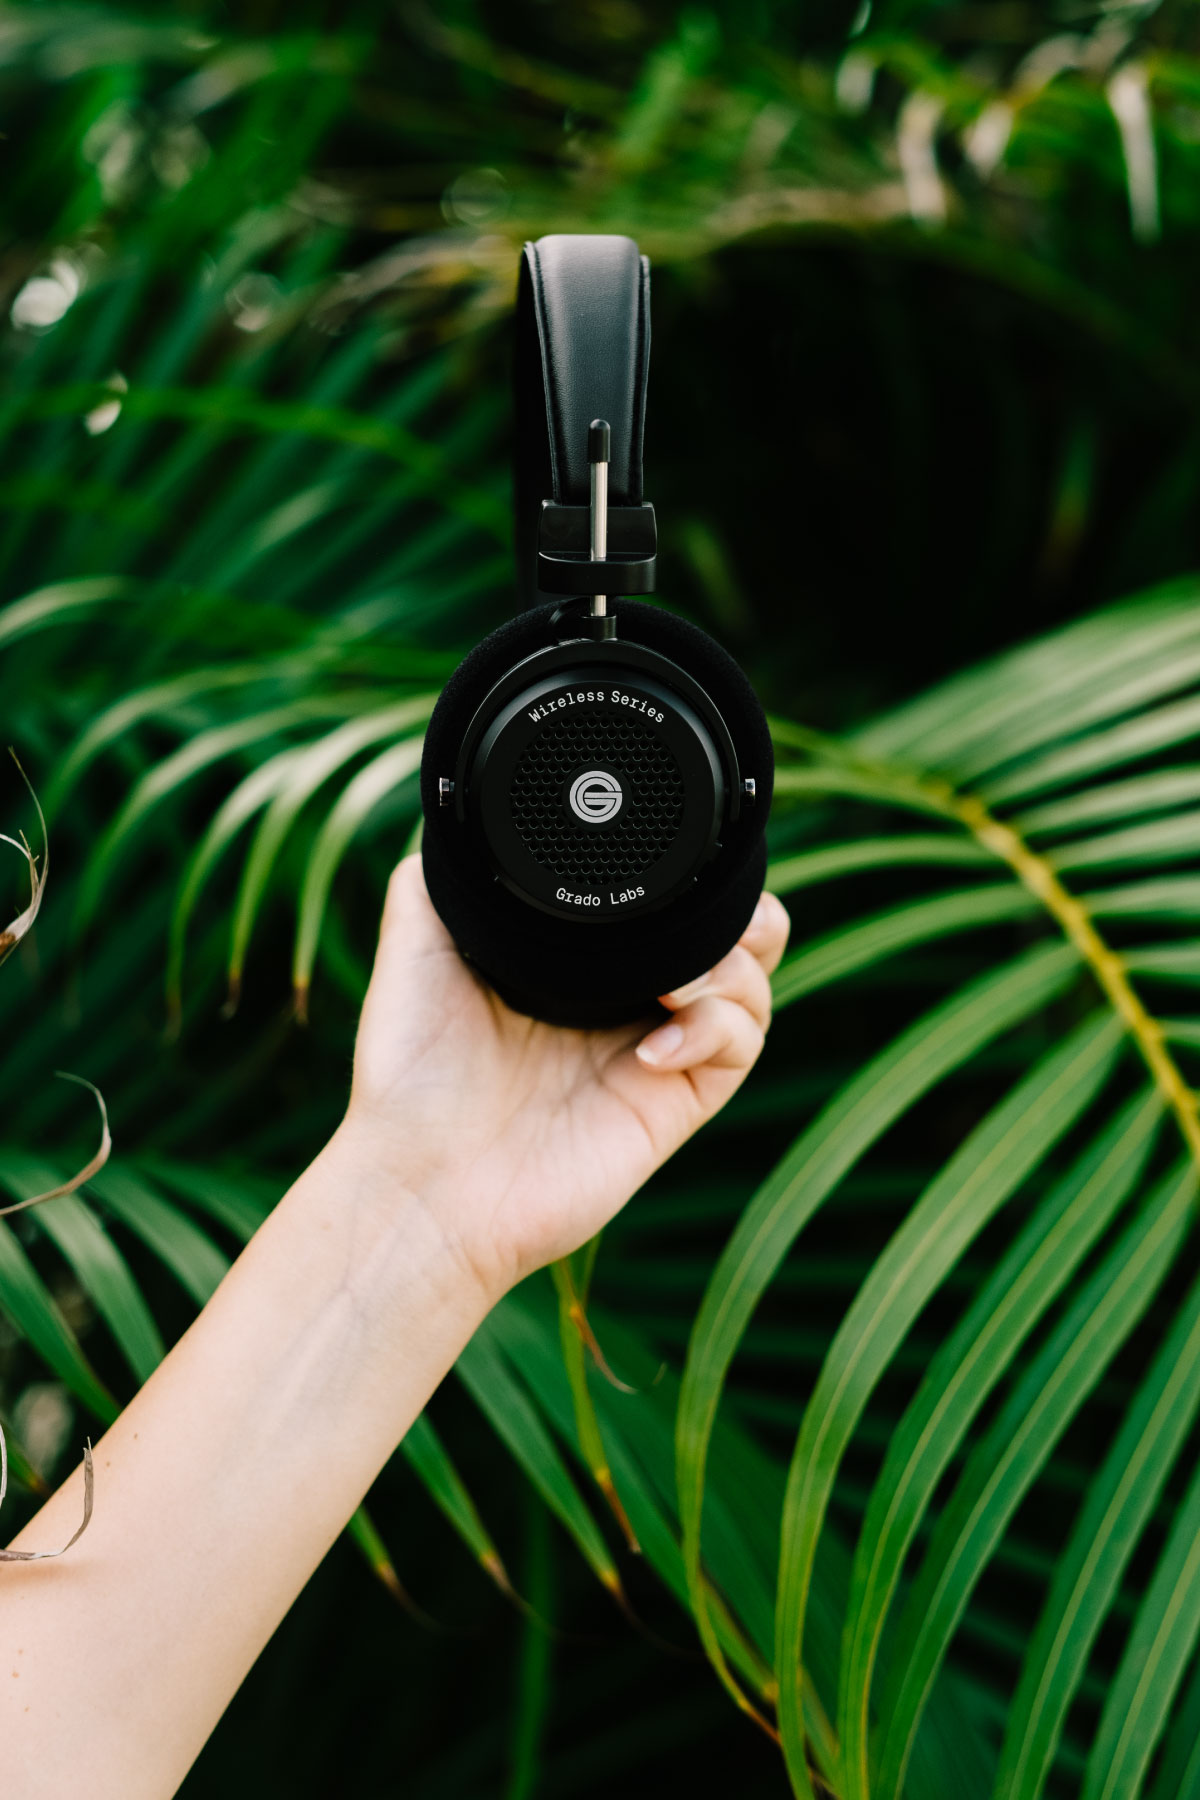 Photo of GW100 headphones being held in front of large green leaves